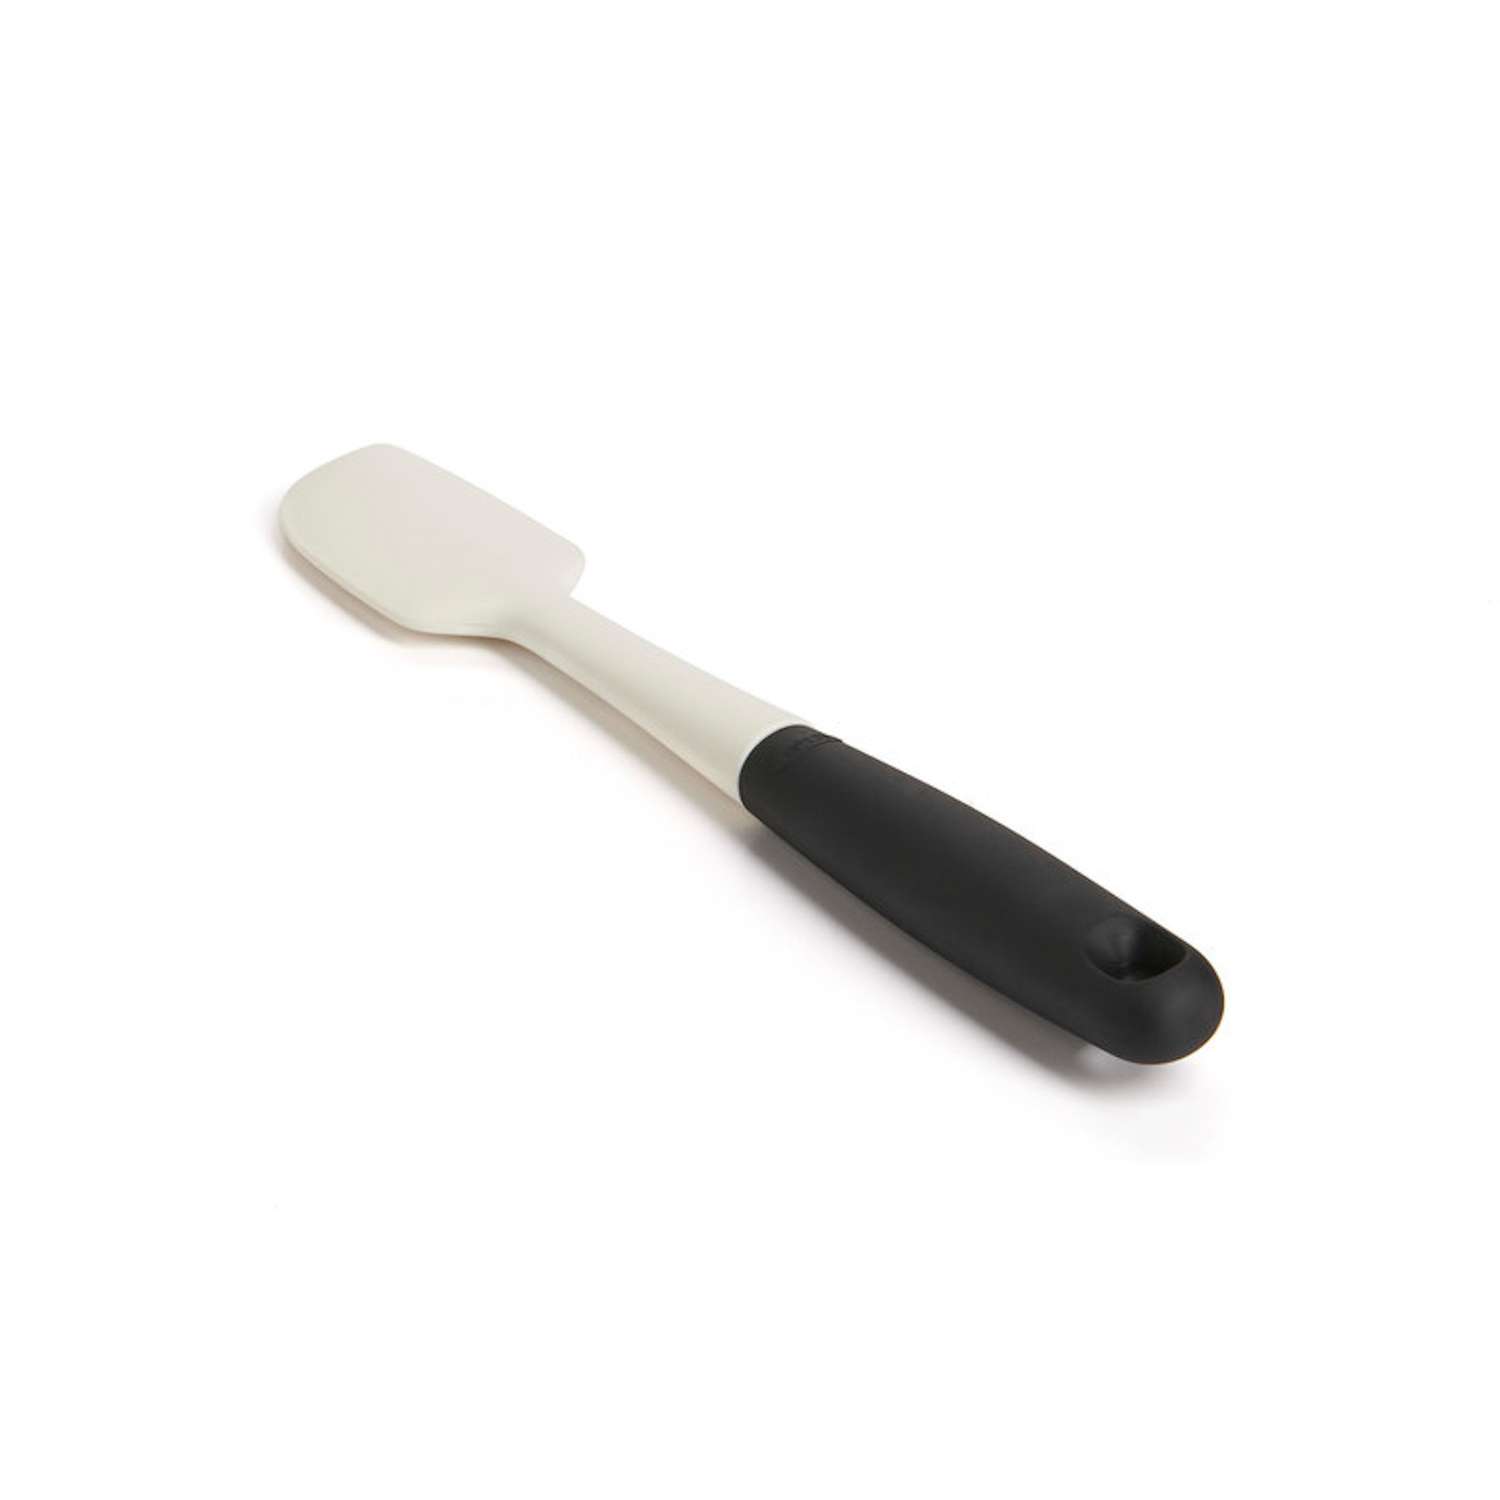  OXO Good Grips Silicone Jar Spatula - Oat: Home & Kitchen